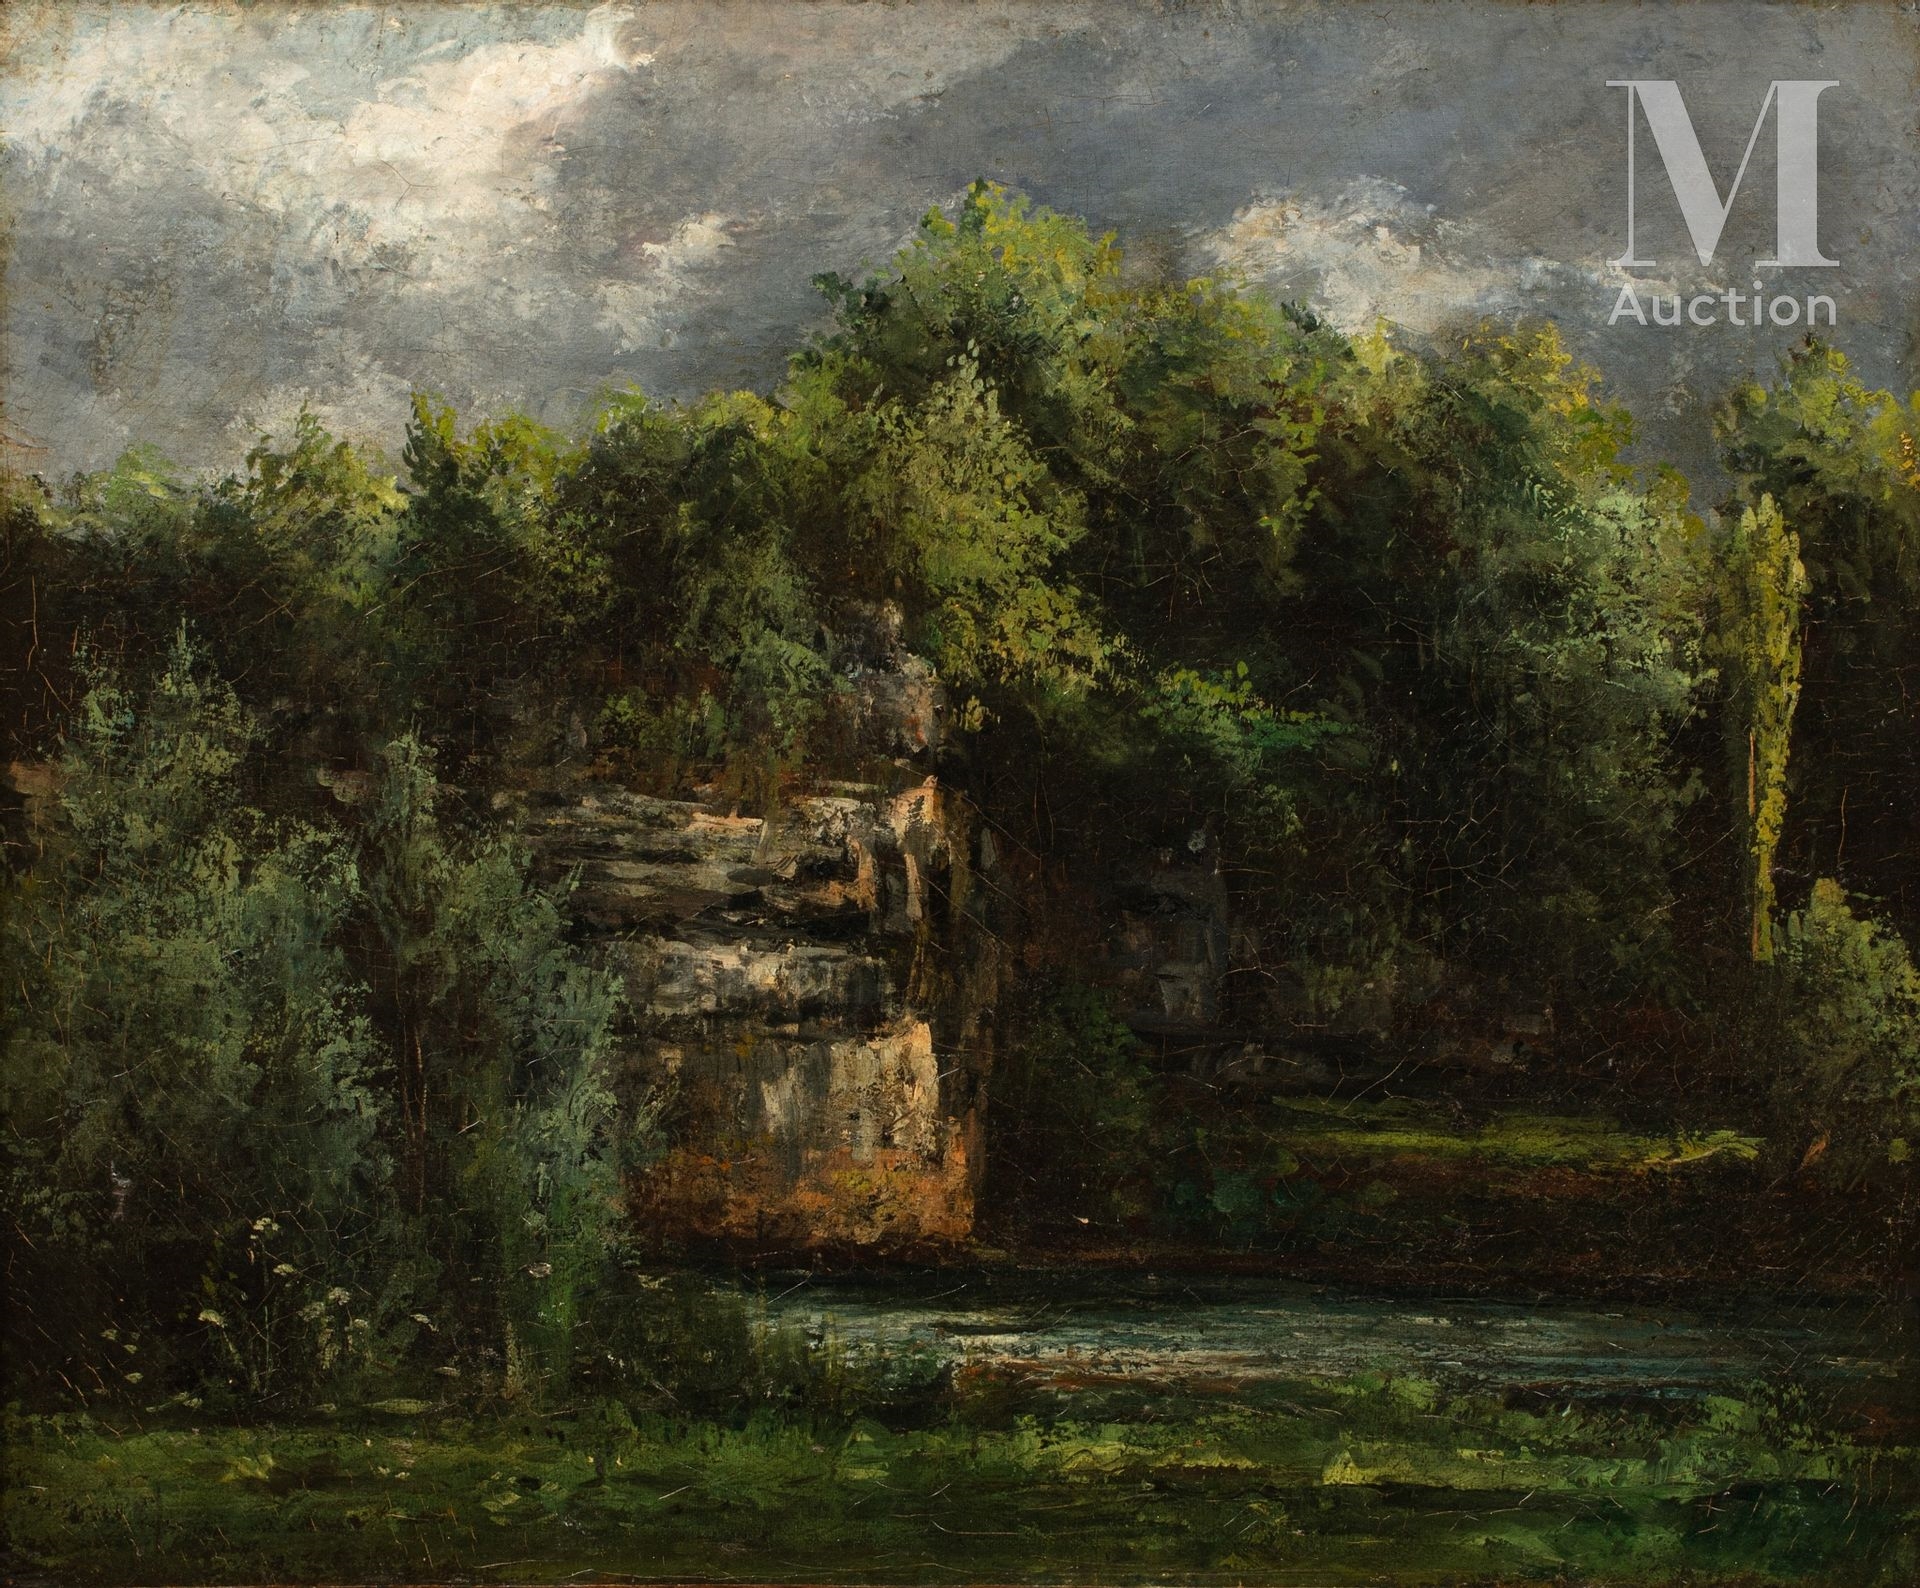 Artwork by Gustave Courbet, Paysage, La lLue, Made of oil on canvas